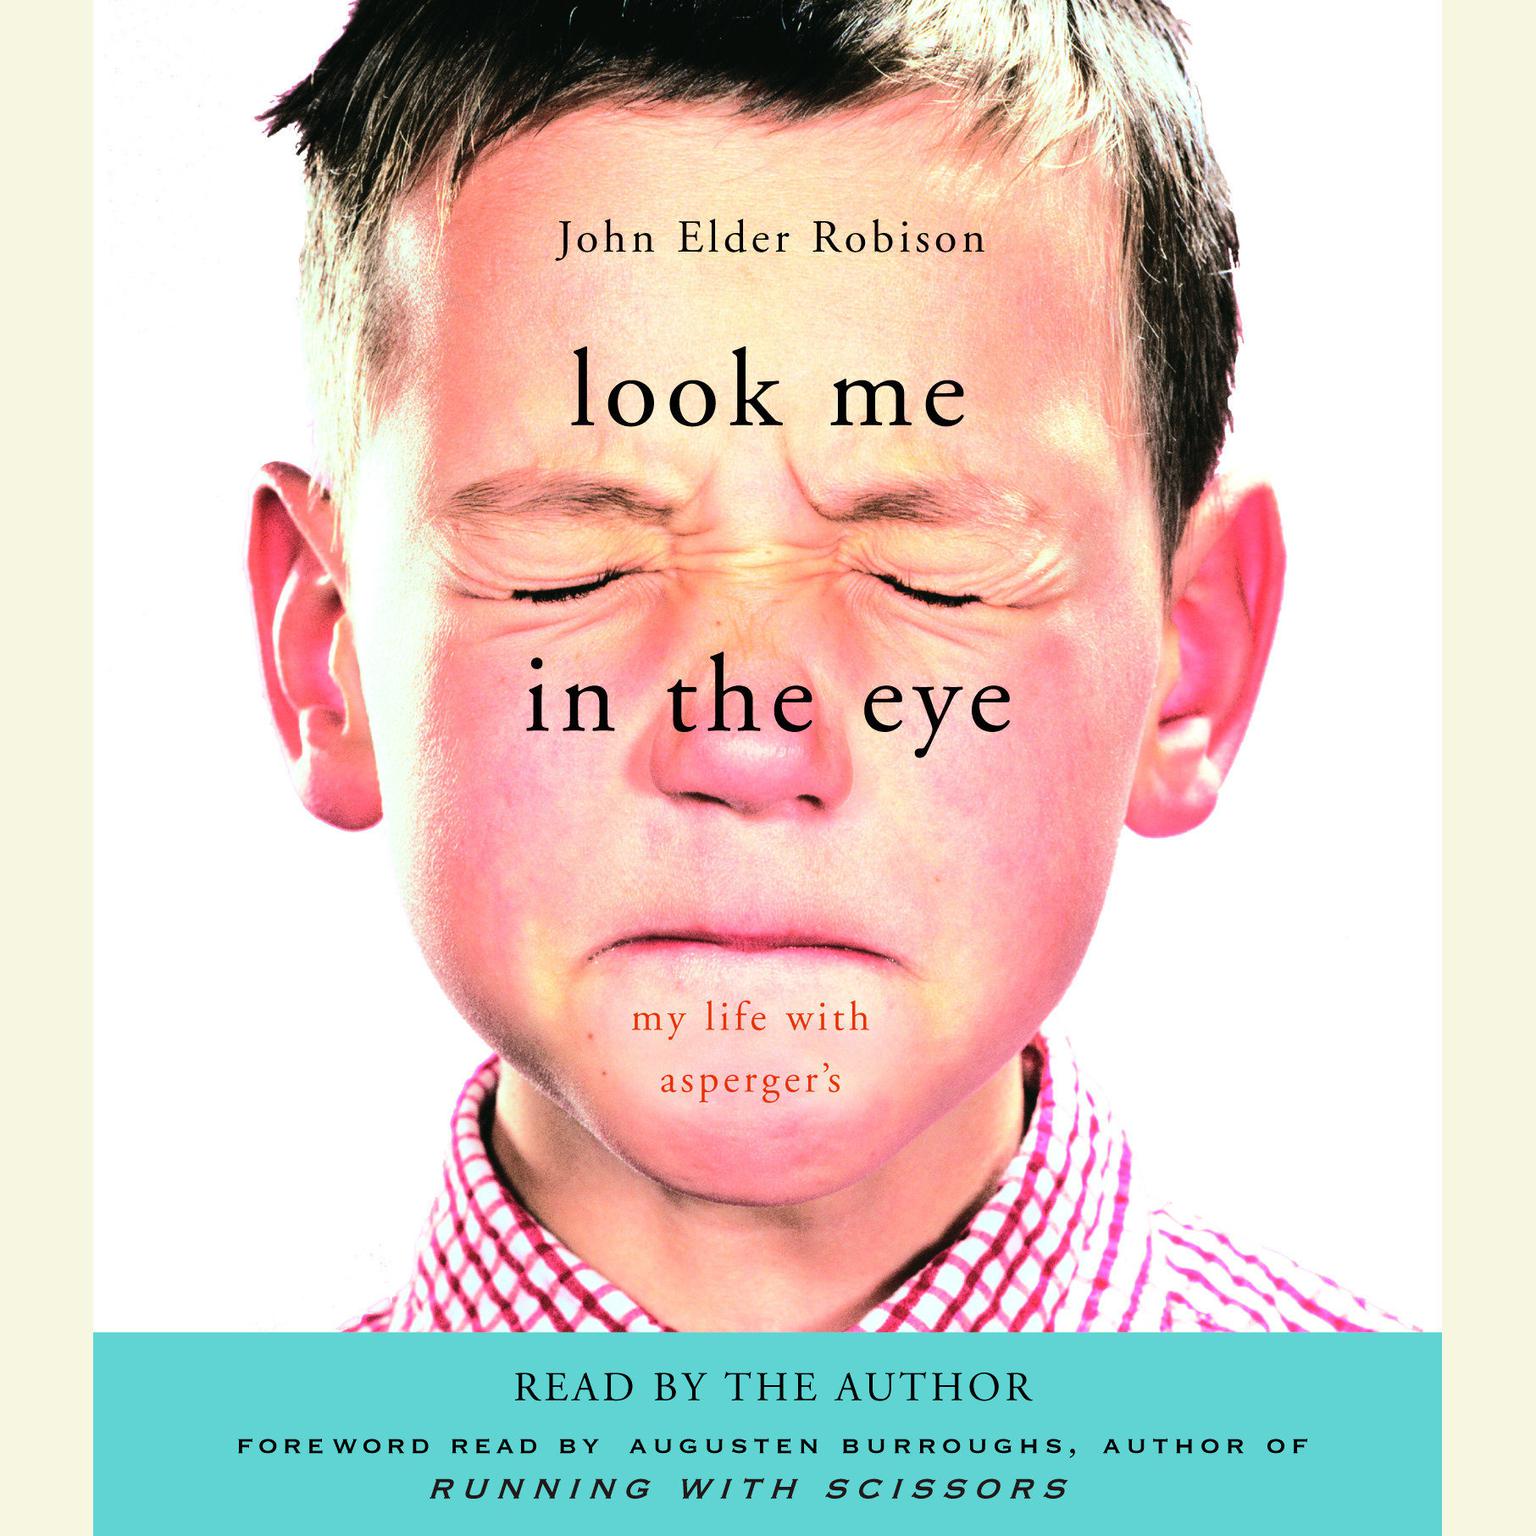 Look Me in the Eye (Abridged): My Life with Aspergers Audiobook, by John Elder Robison